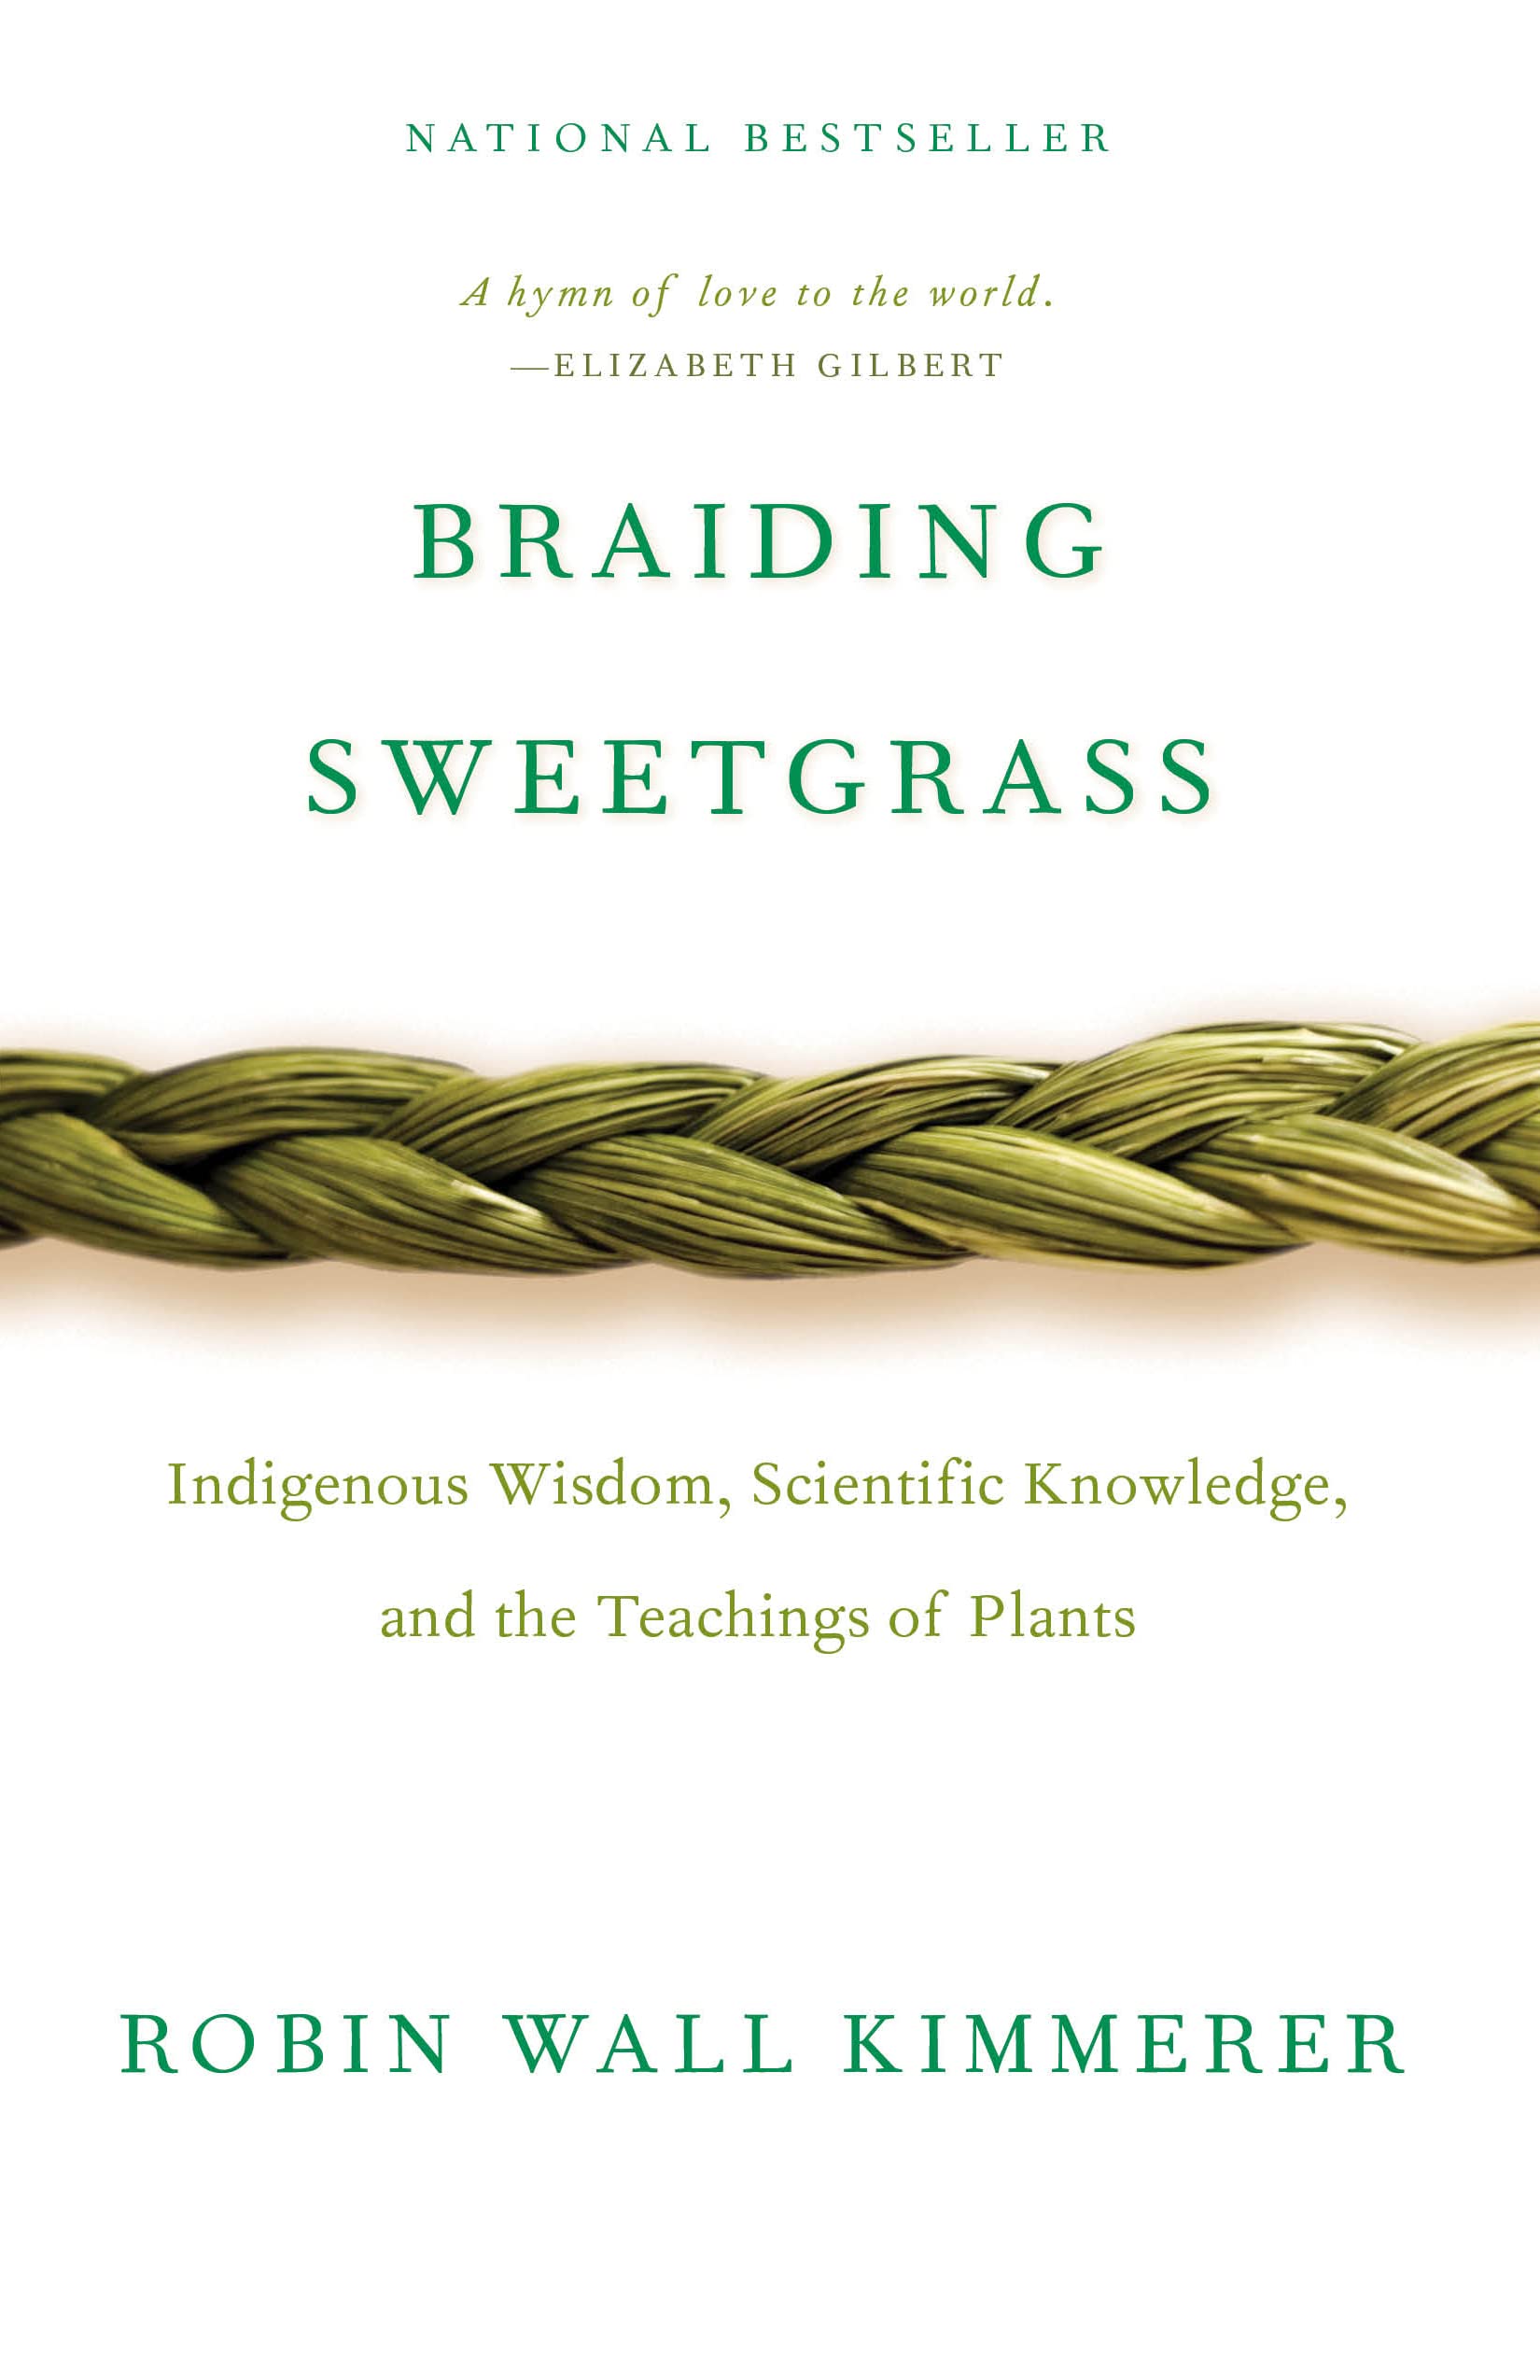 book cover braiding sweetgrass by robin wall kimmer